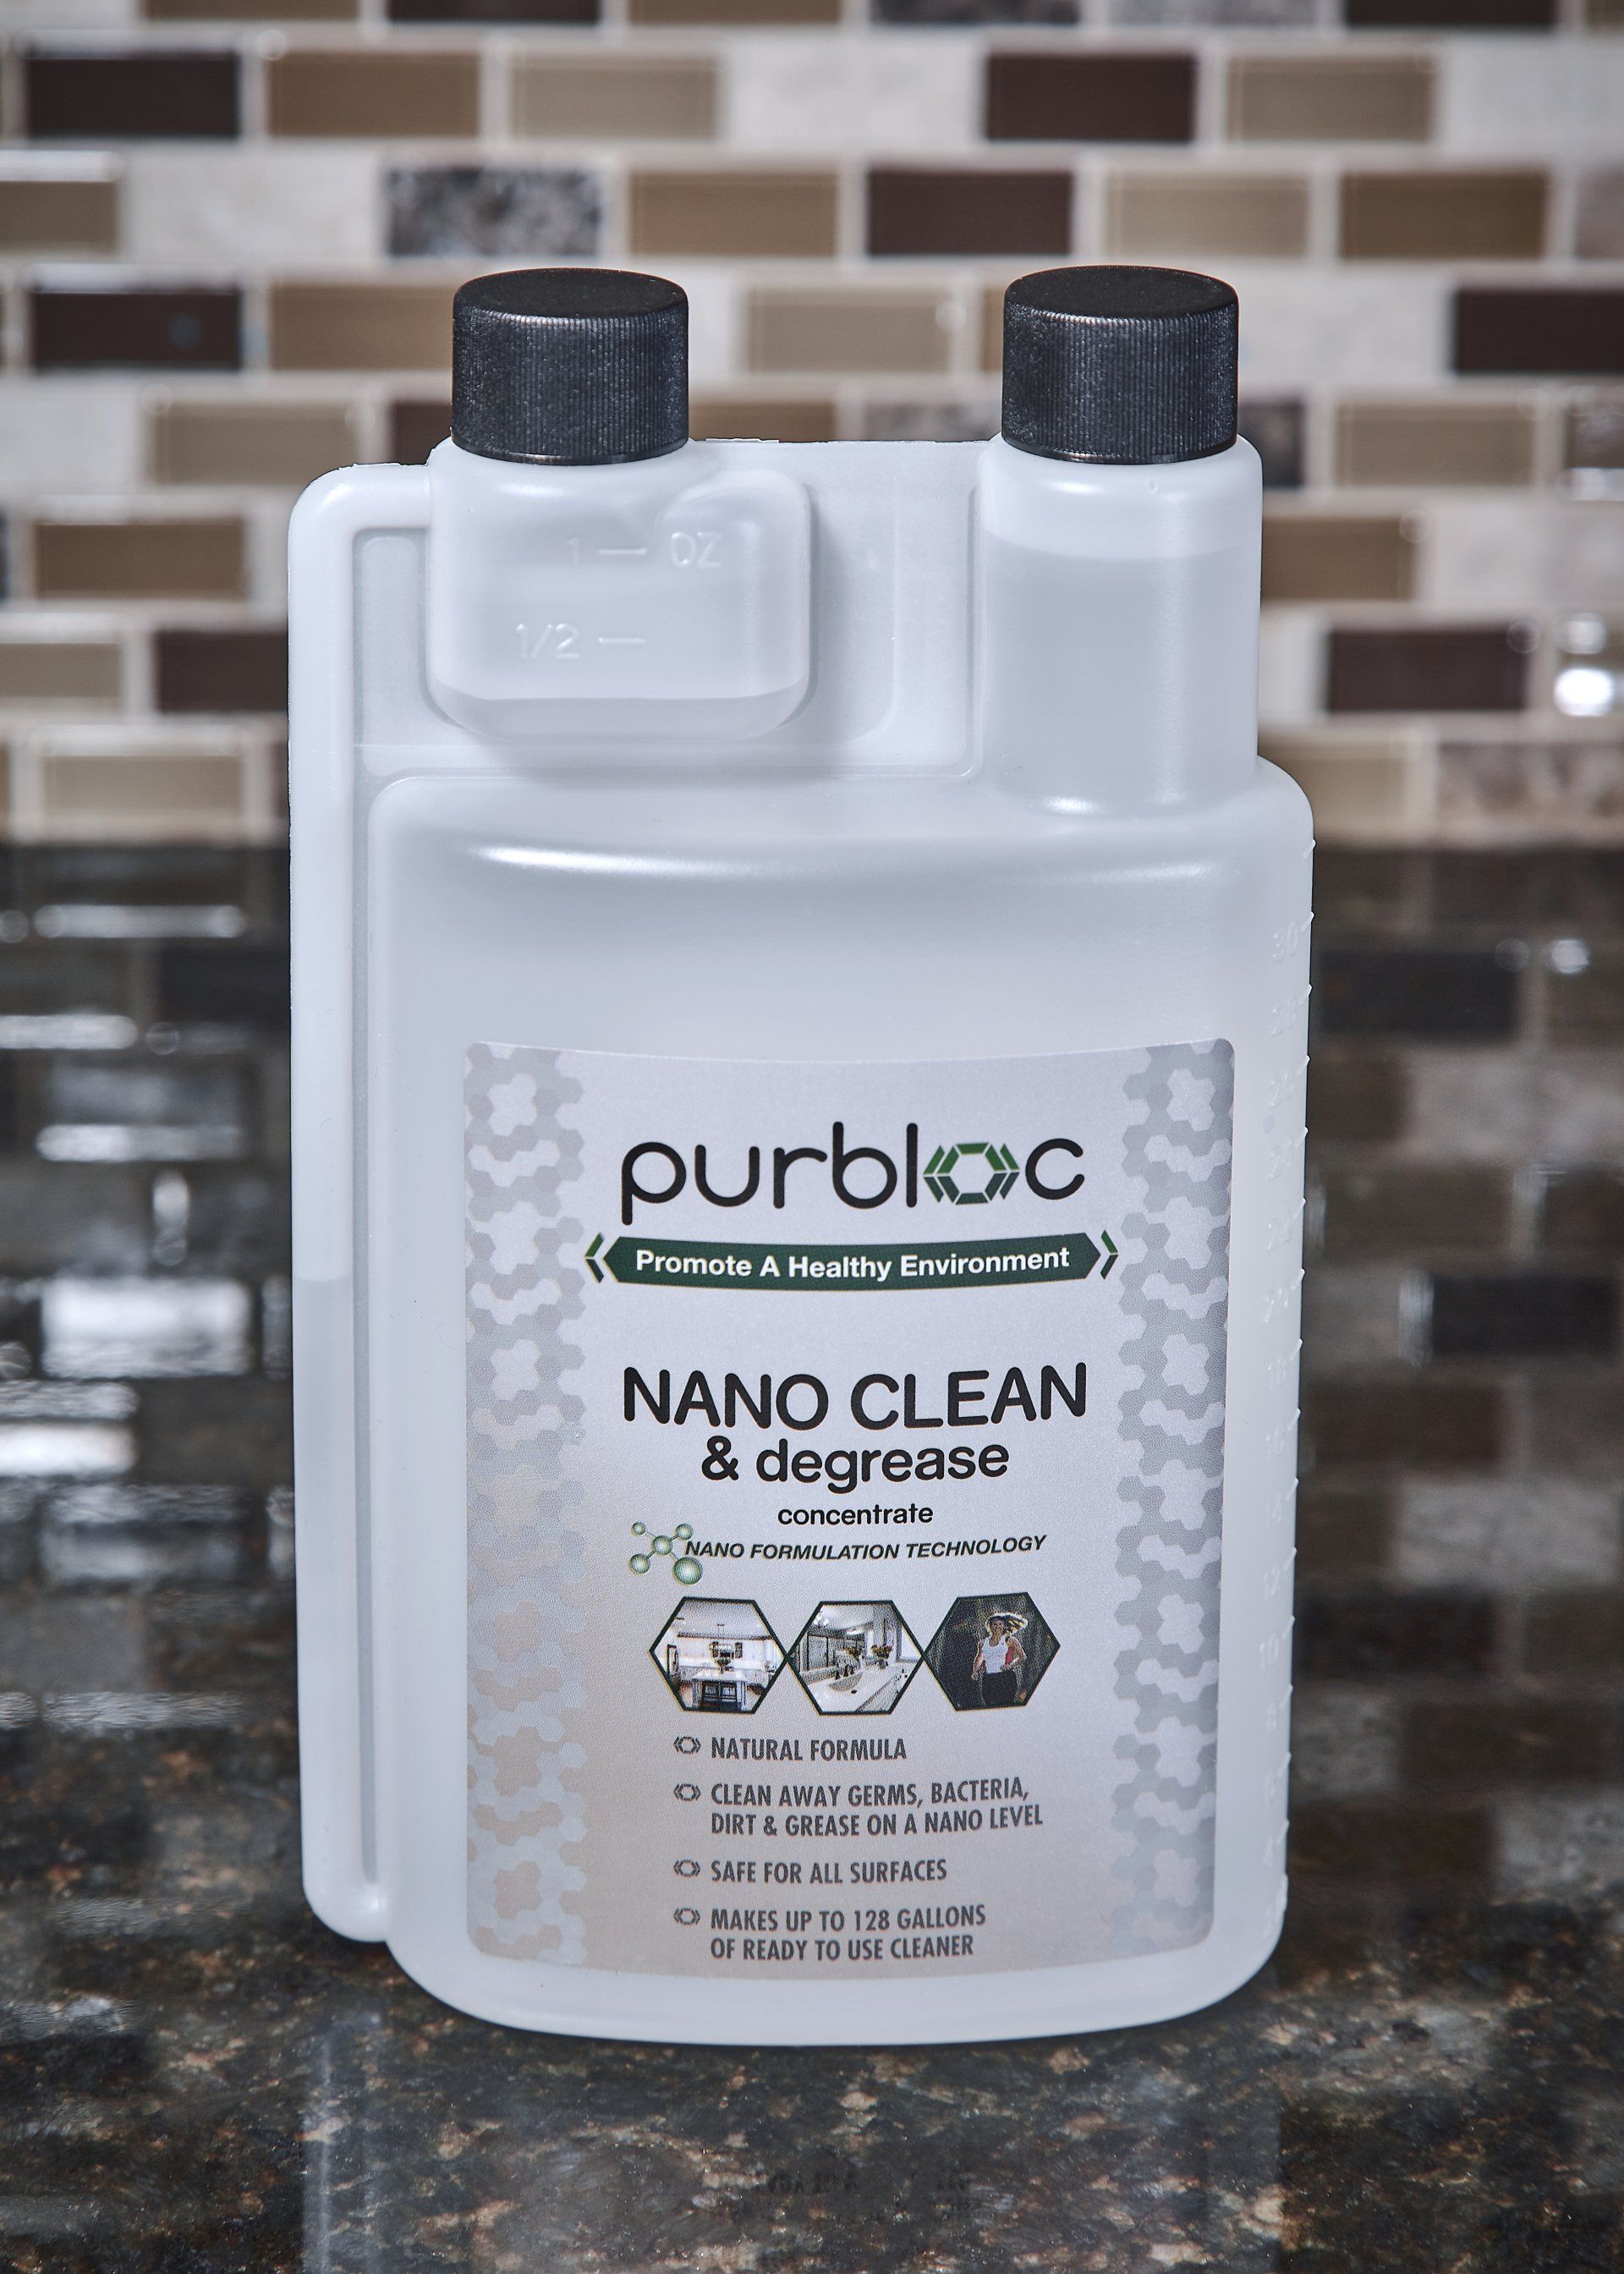 NANO CLEAN and degrease